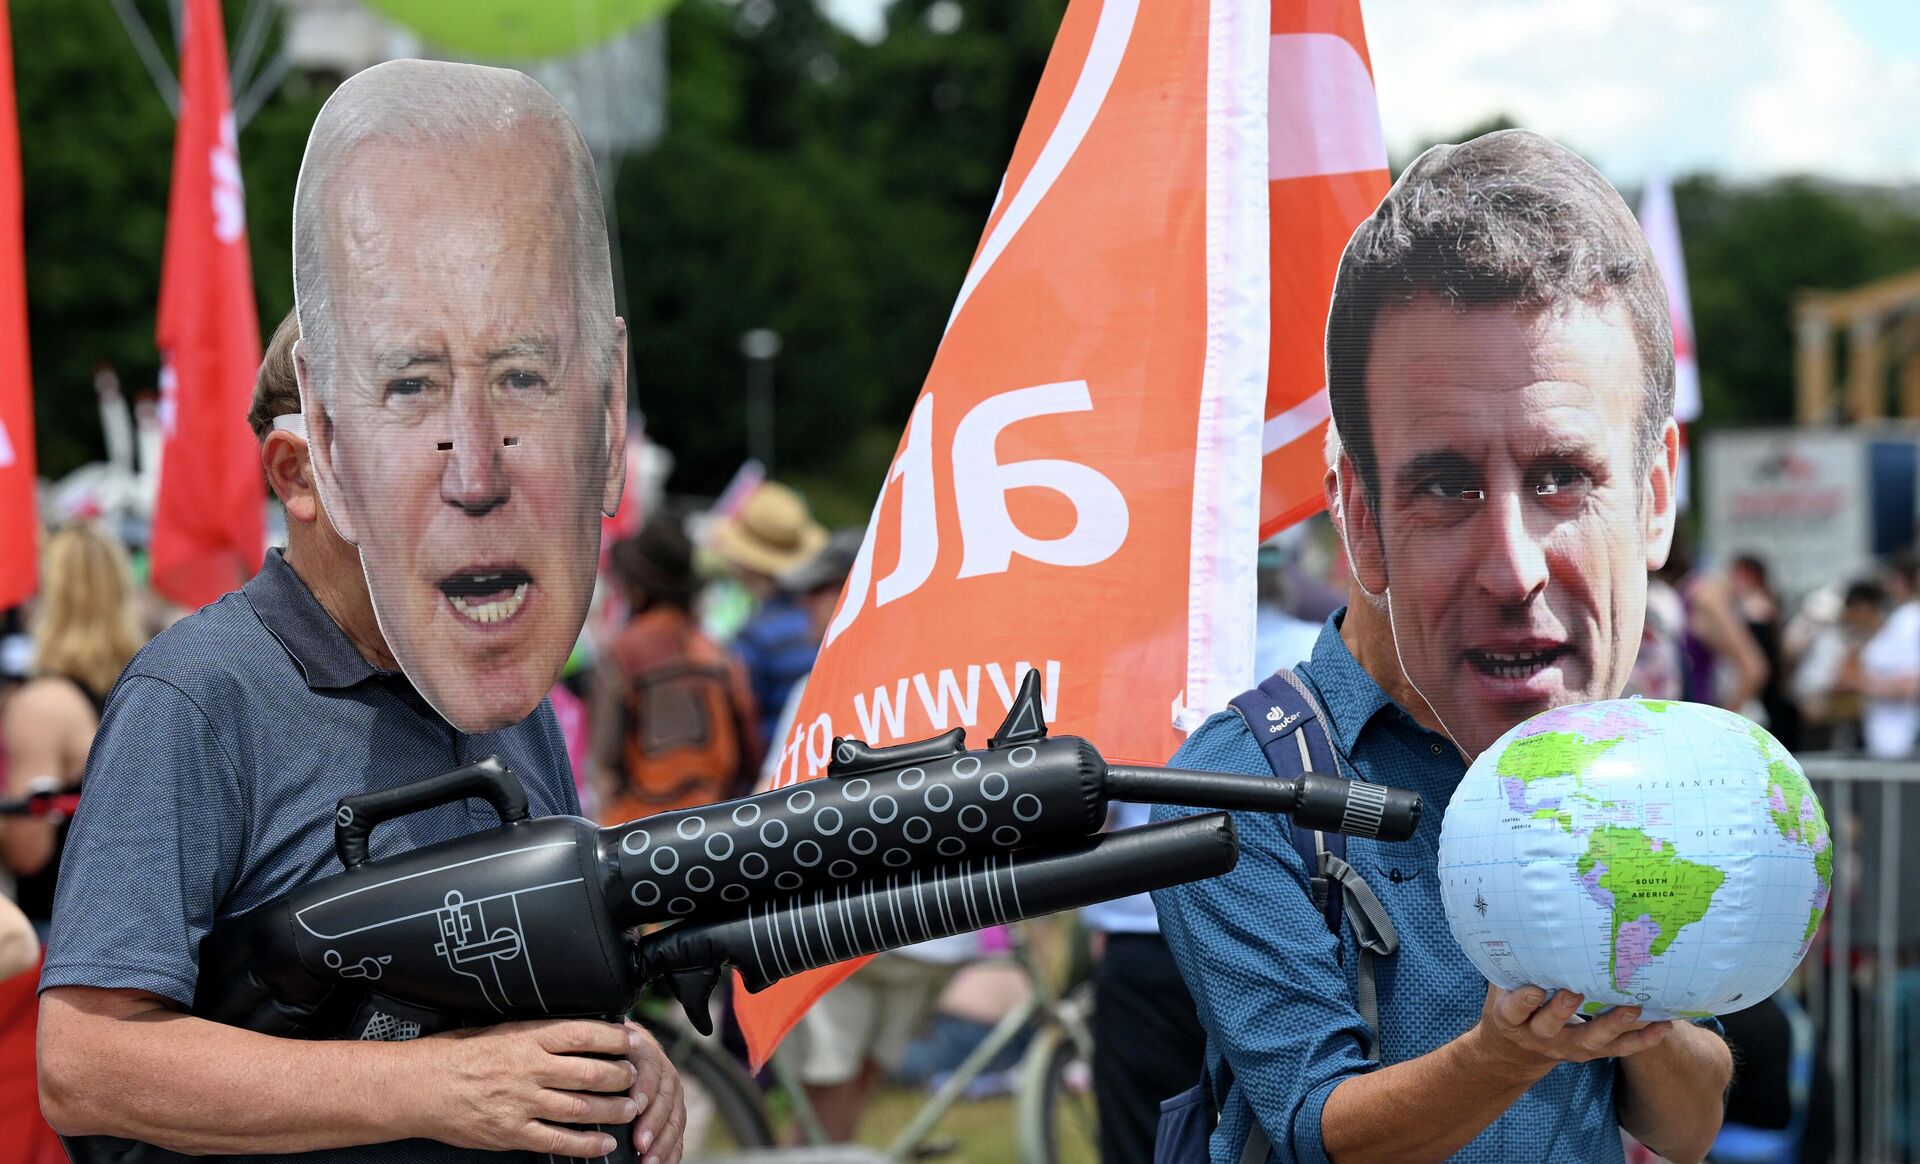 Protesters wearing masks of US President Joe Biden (L) and French President Emmanuel Macron take part in a demonstration called for by Greenpeace, Attac and other organisations ahead of the G7 Summit at the Theresienwiese in Munich, southern Germany on June 25, 2022.  - Sputnik International, 1920, 25.06.2022